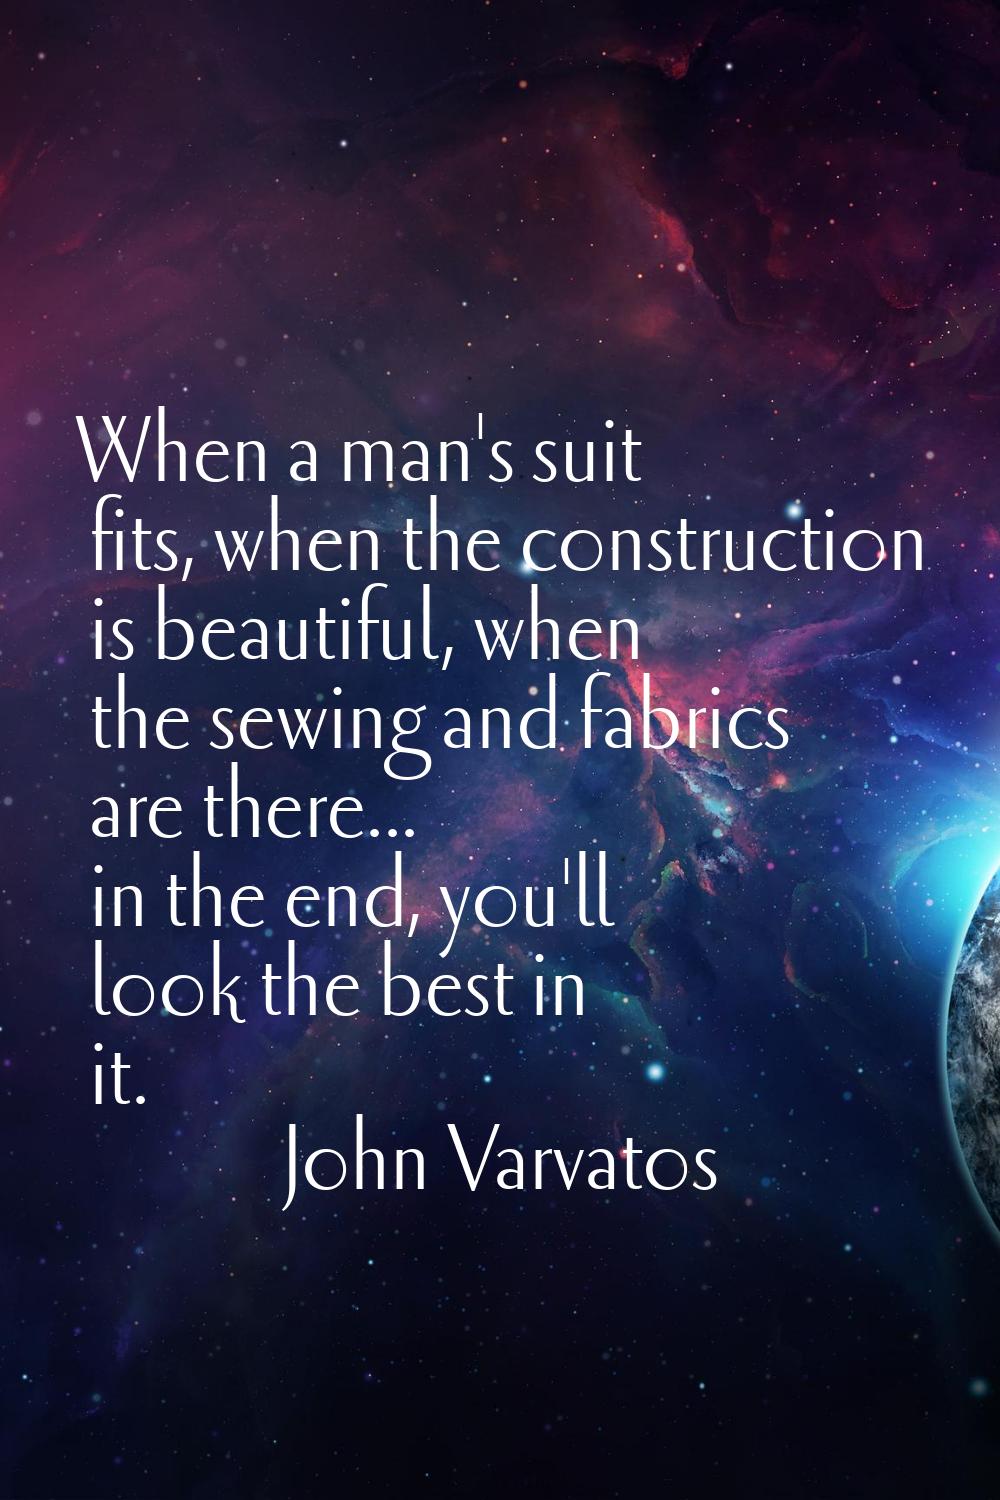 When a man's suit fits, when the construction is beautiful, when the sewing and fabrics are there..